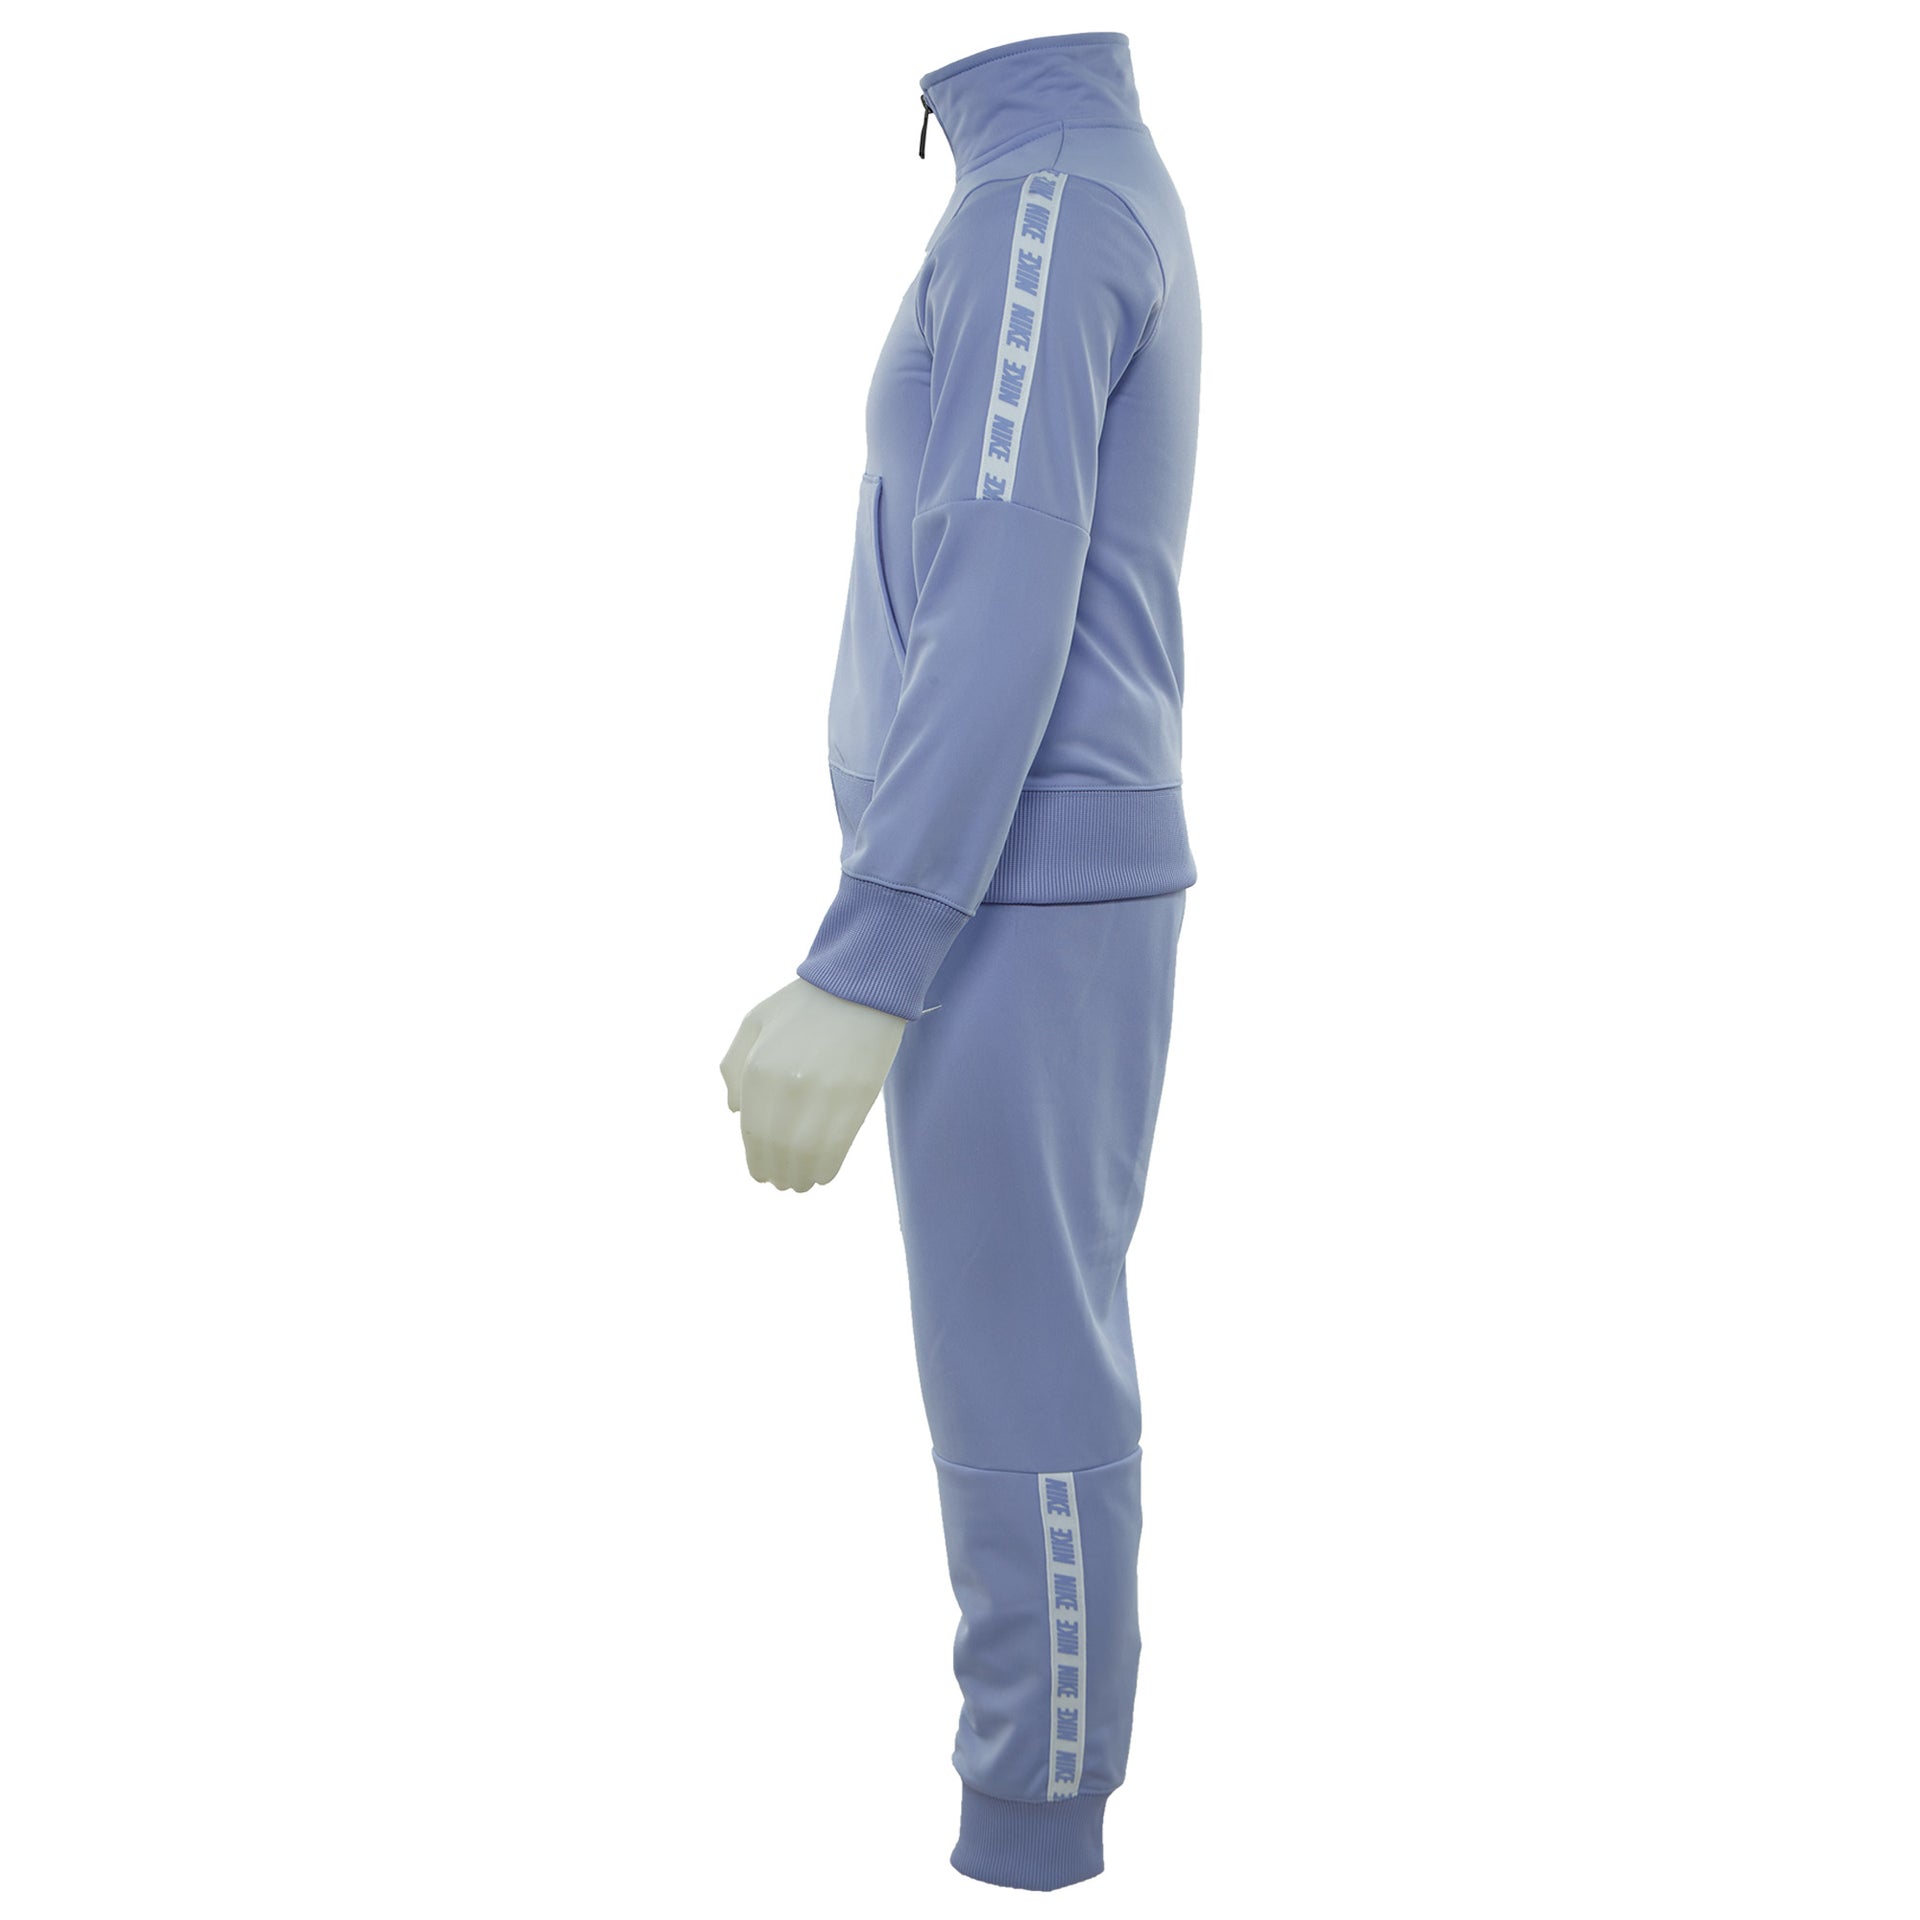 Nike Nsw Track Suit Tricot Big Kids Style : 939456-477